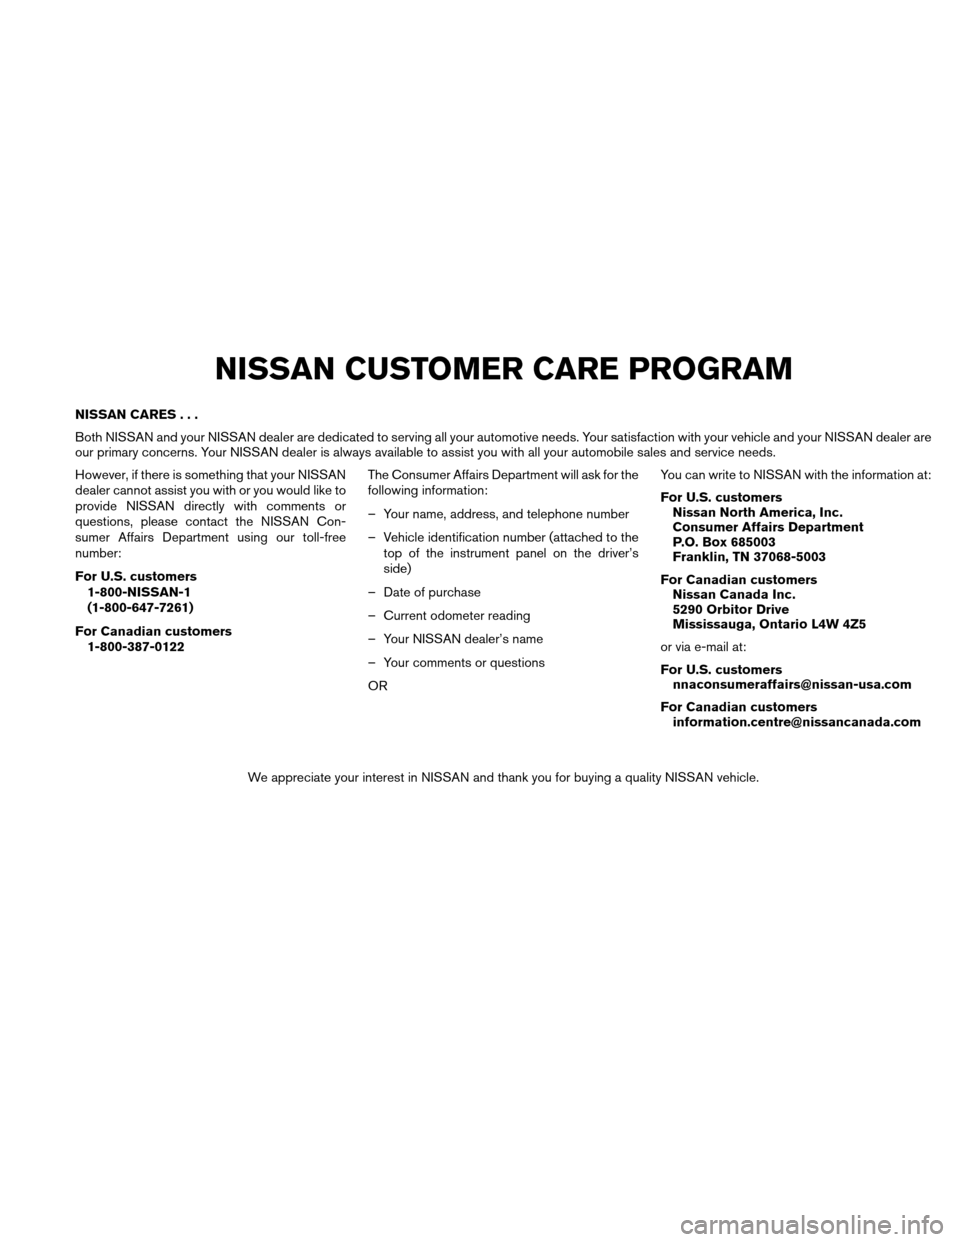 NISSAN ALTIMA COUPE 2011 D32 / 4.G Owners Manual NISSAN CARES...
Both NISSAN and your NISSAN dealer are dedicated to serving all your automotive needs. Your satisfaction with your vehicle and your NISSAN dealer are
our primary concerns. Your NISSAN 